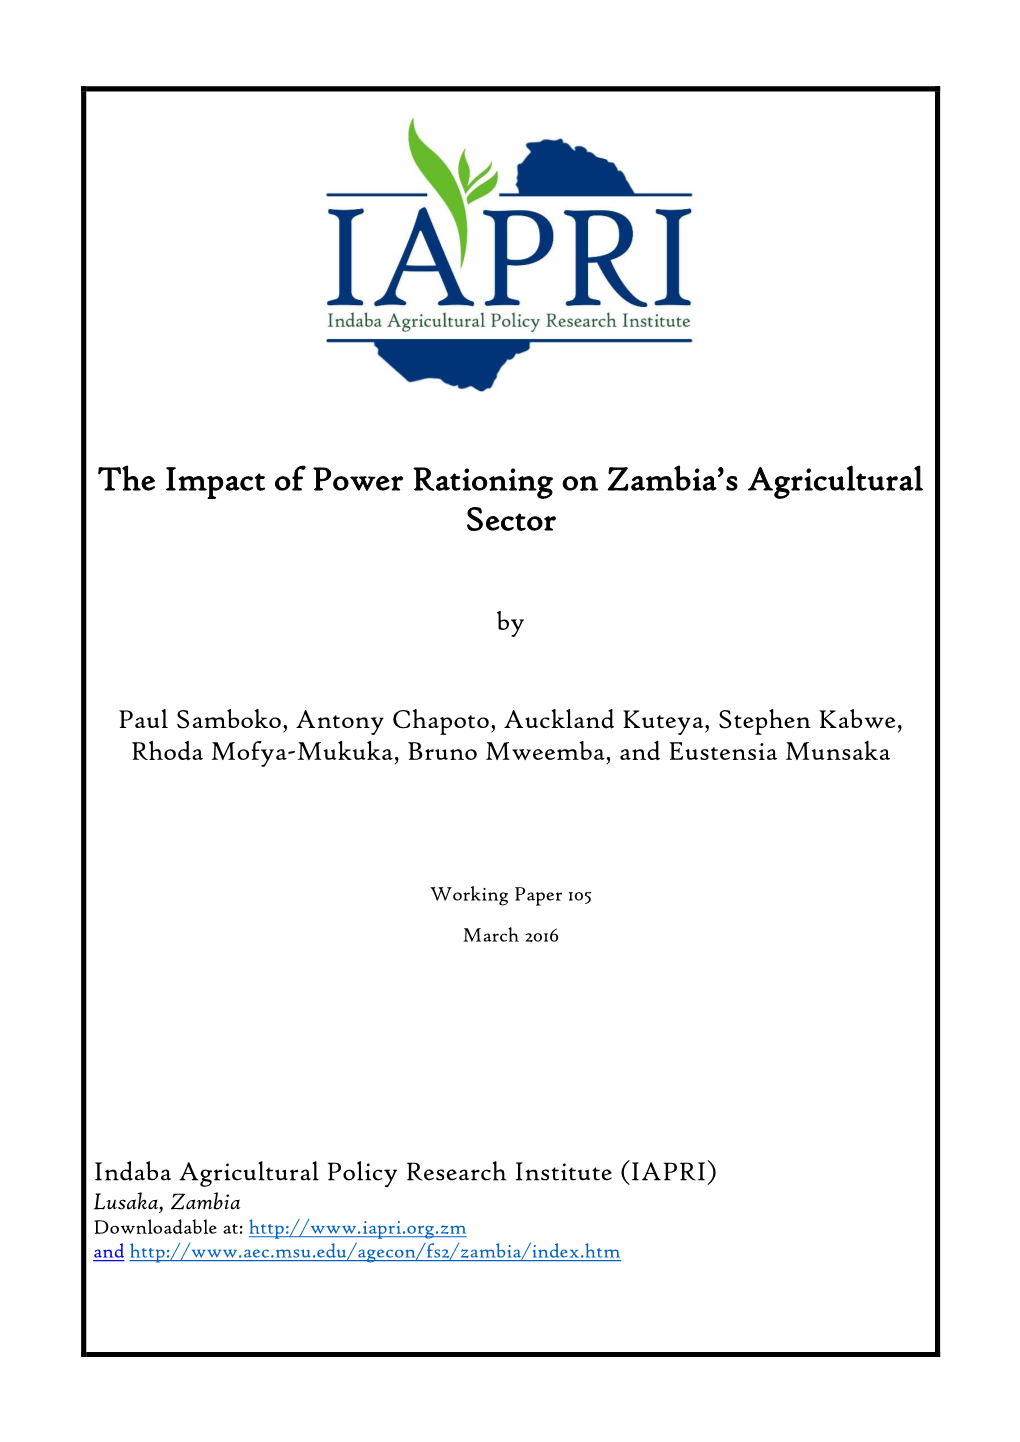 The Impact of Power Rationing on Zambia's Agricultural Sector